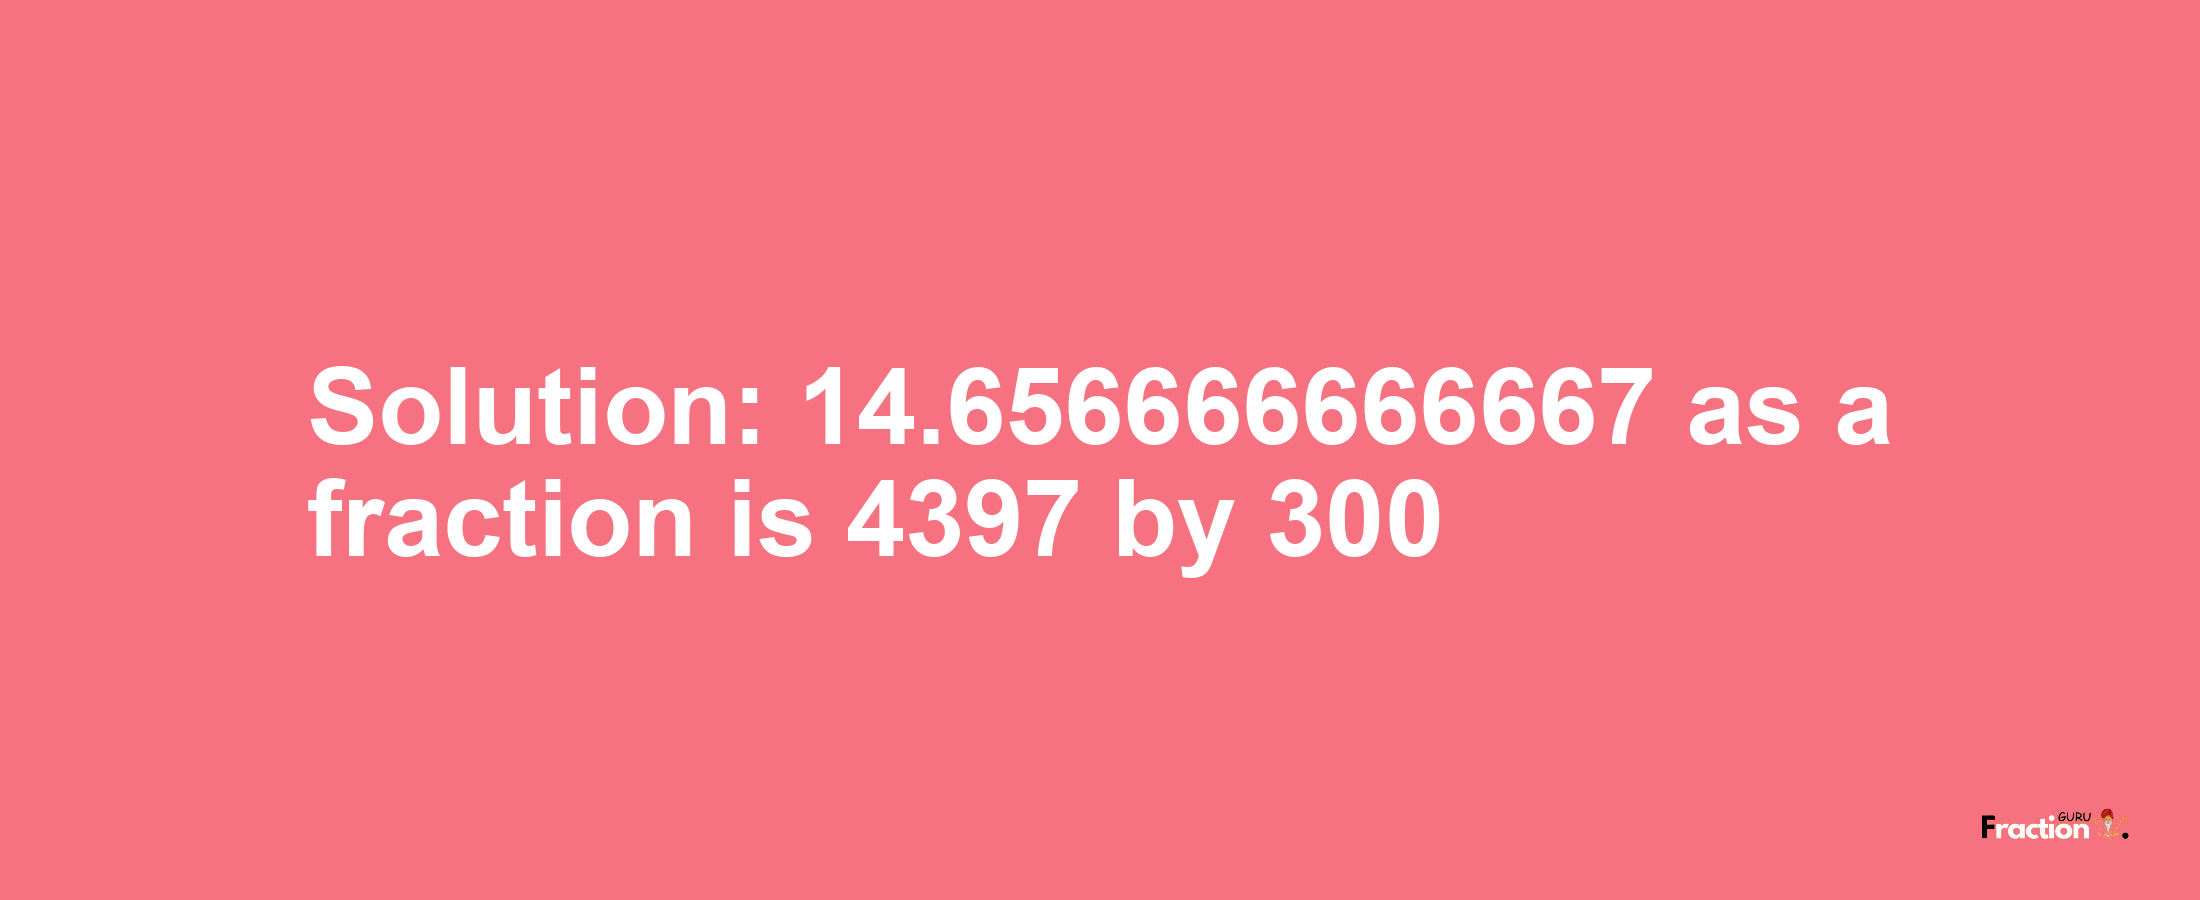 Solution:14.656666666667 as a fraction is 4397/300